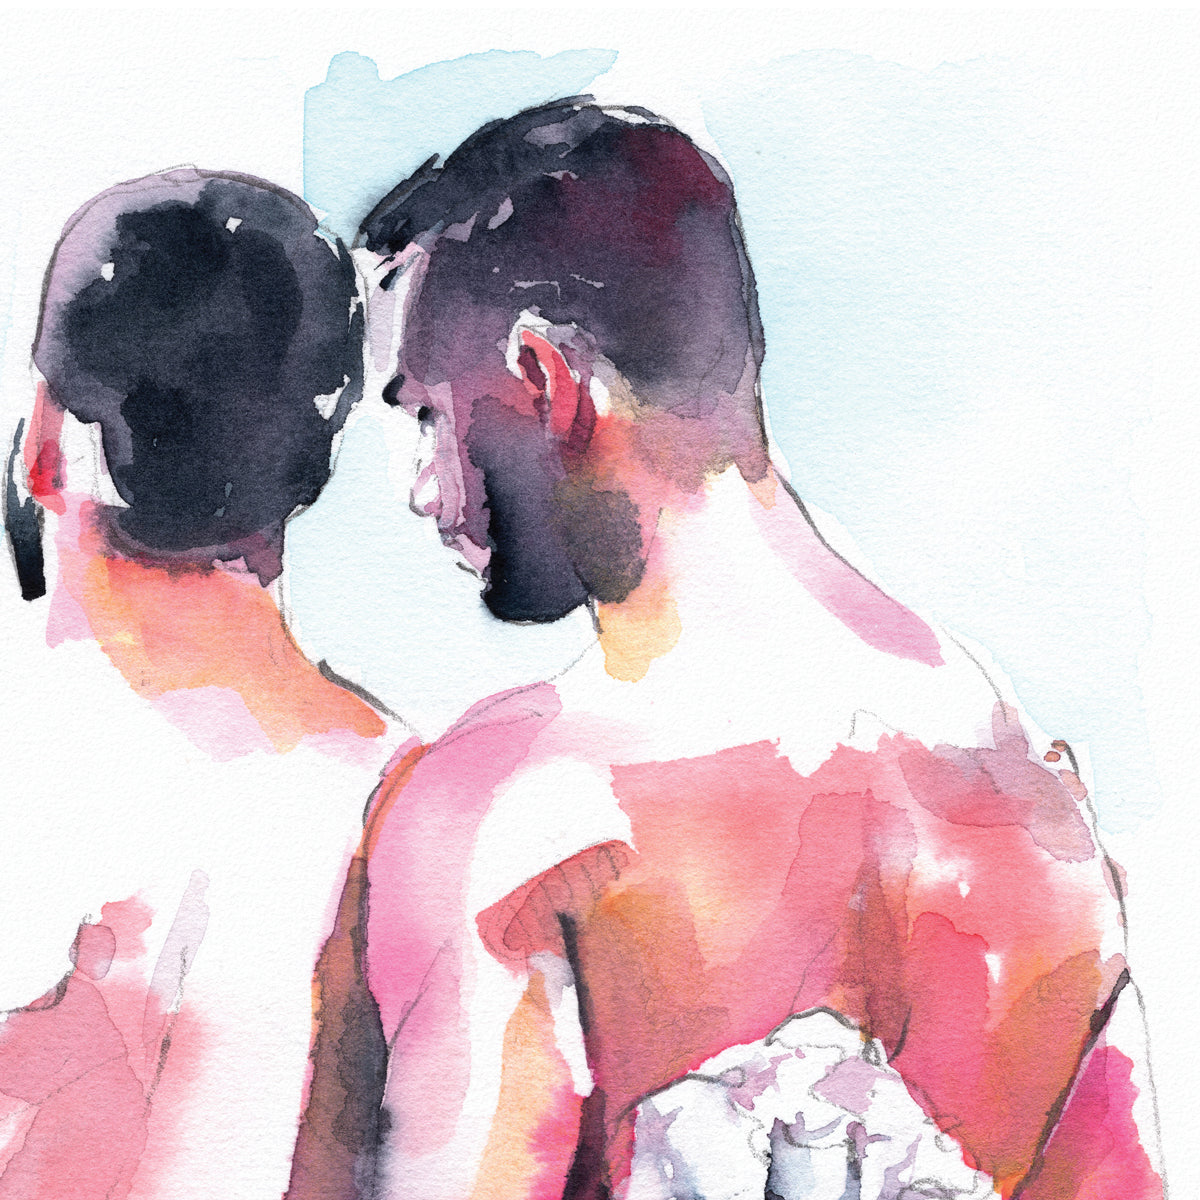 Tender Moment Between Male Lovers with Crimson Embrace - Giclee Art Print